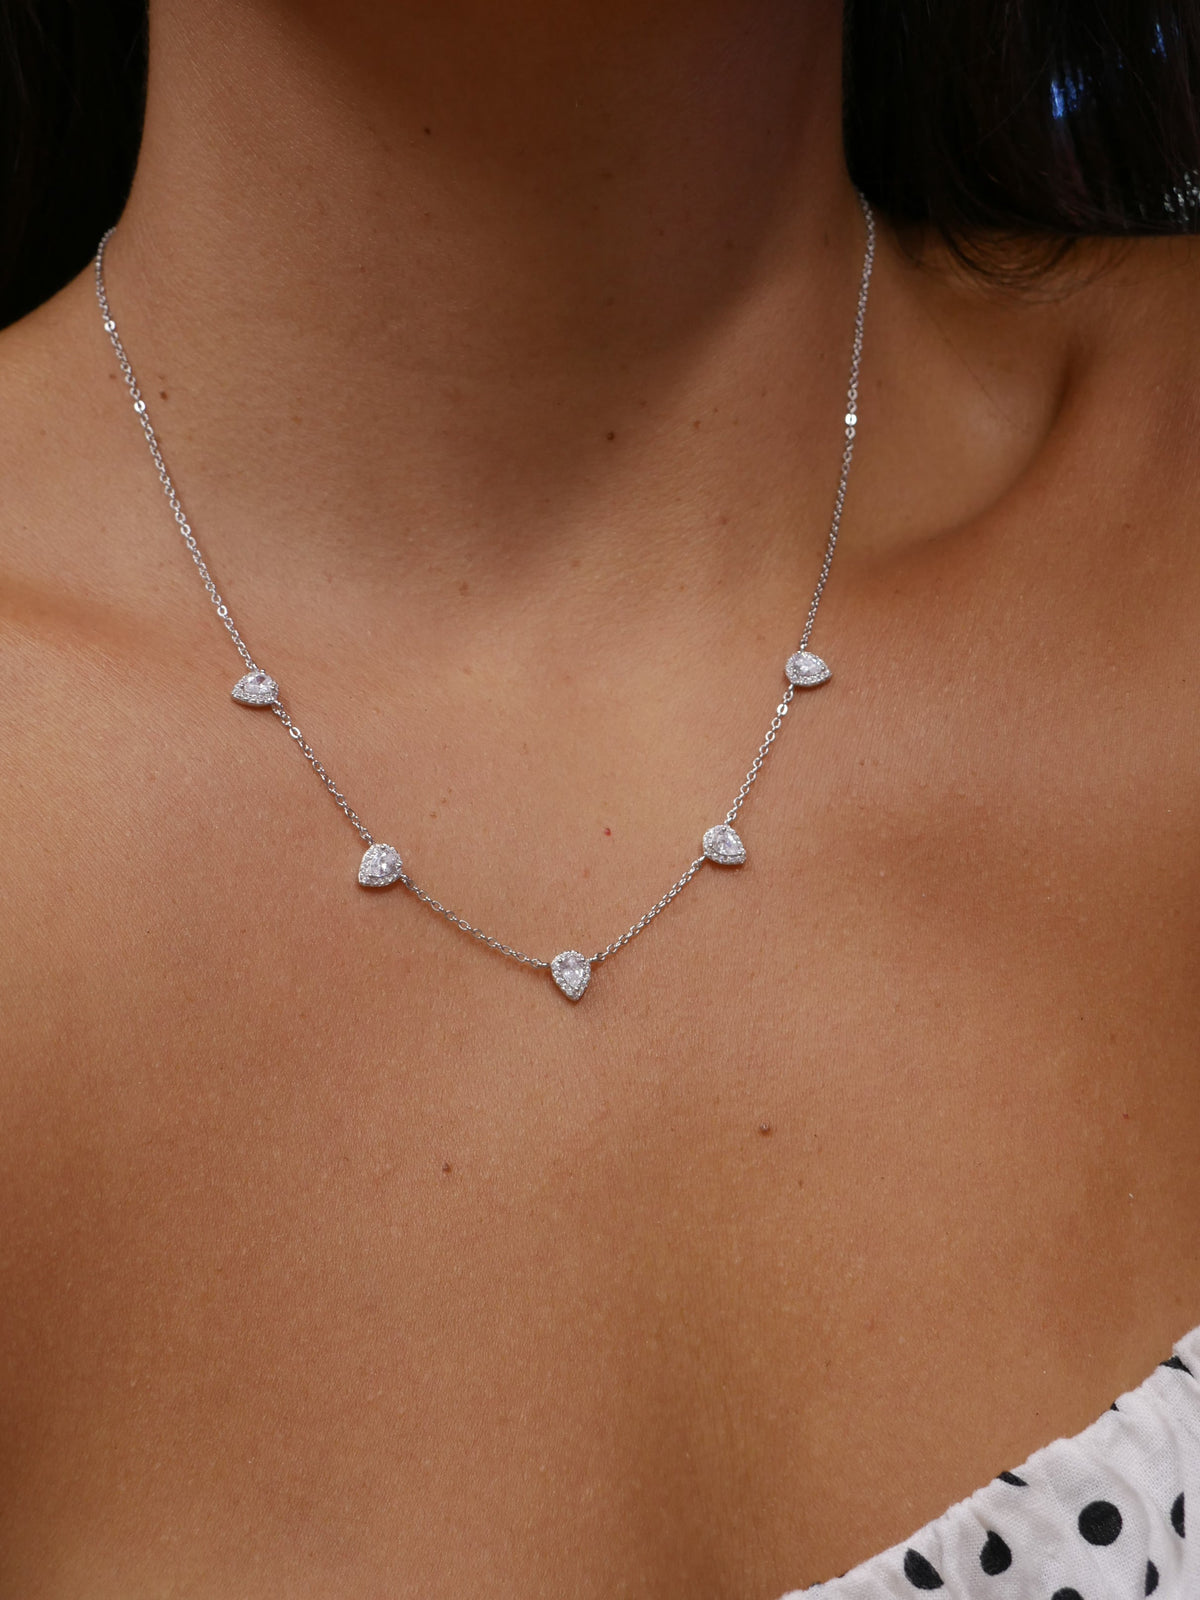 necklaces, sterling silver necklaces, white gold, short necklaces, casual necklaces, elegant necklaces, pear shape necklaces, tear shape necklaces, anniversary gift ideas, graduation gift ideas, nickel free necklaces, designer necklaces, nice jewelry, black tie necklaces, wedding jewelry, bridesmaids necklaces, waterproof necklaces, hypoallergenic jewelry, going out jewelry, popular necklaces